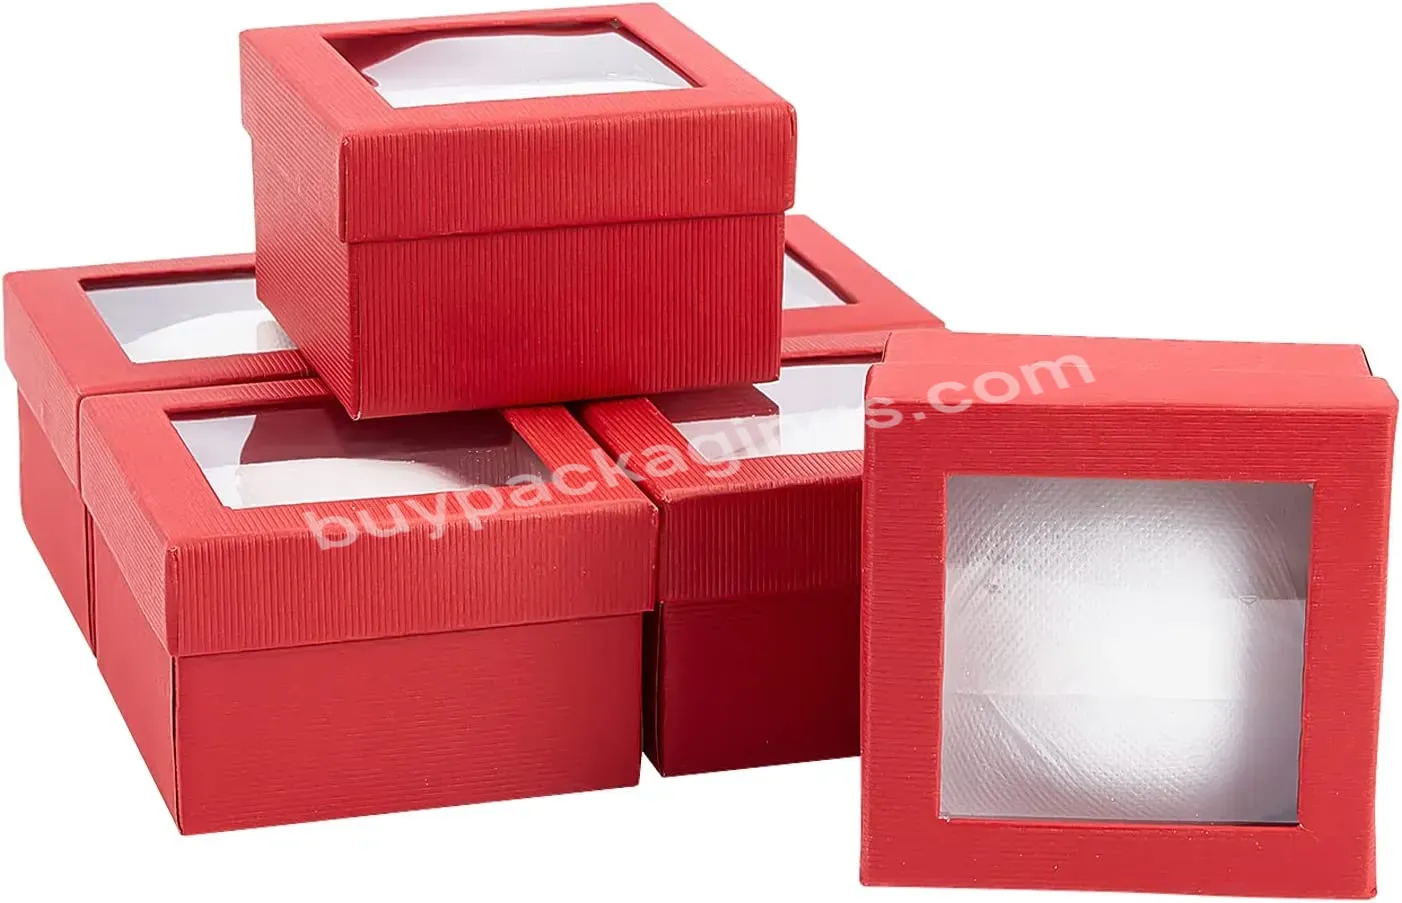 Custom Luxury Cardboard Watch Boxes Paper Jewelry Display Box With Sponge And Pvc Transparent Window - Buy New Design Paper Watch Boxes Packaging Gift Wrap Box,Oem Customized Cheap Men's And Women's Couple Luxury Square Paper Cardboard Watch Packagin